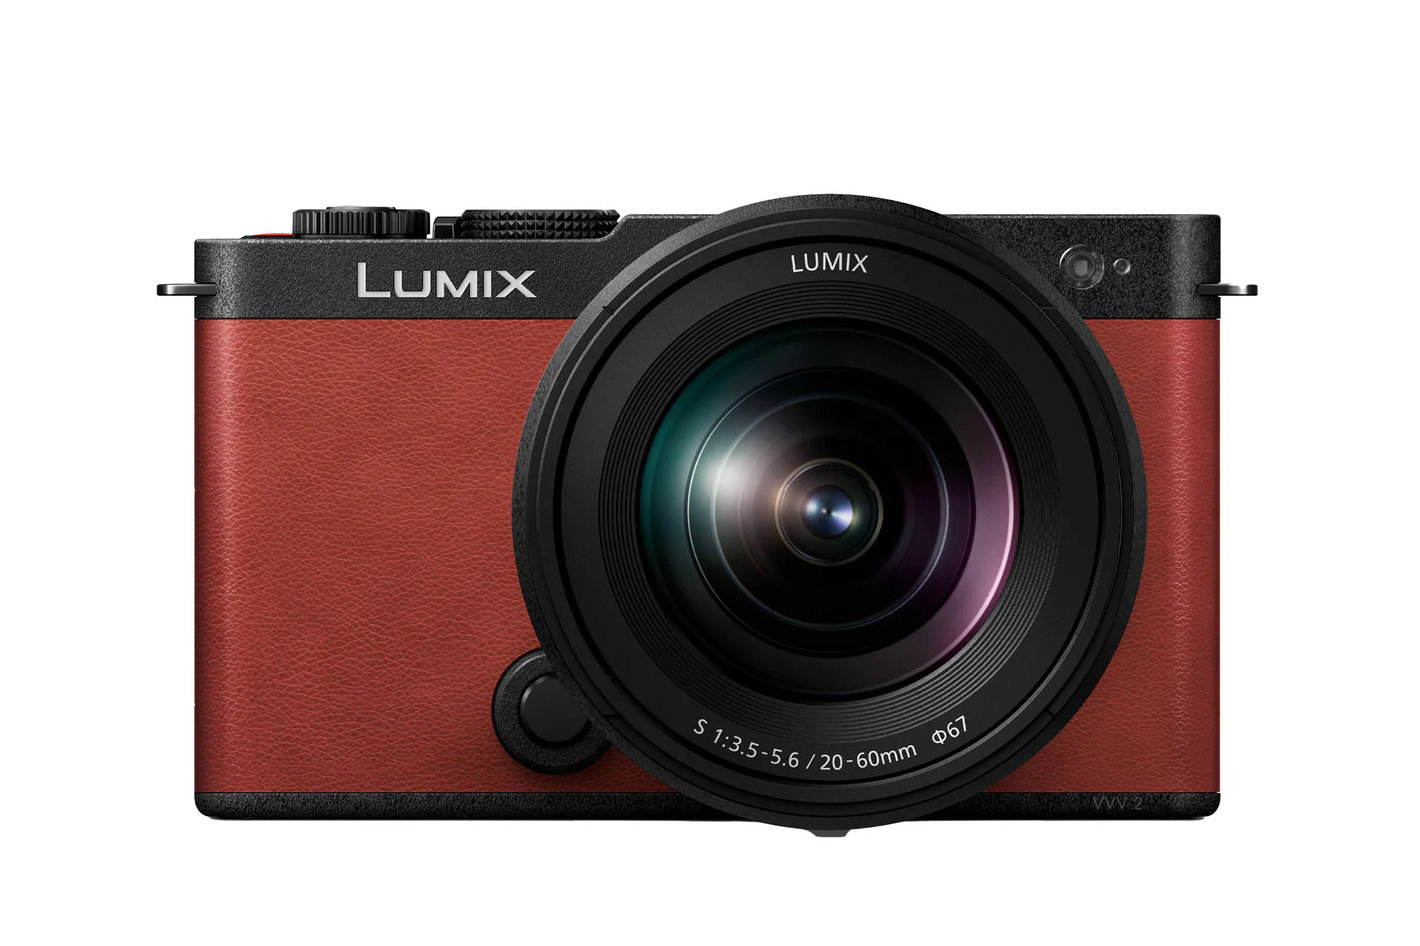 Panasonic LUMIX S9: full-frame compact introduces MP4 Lite video